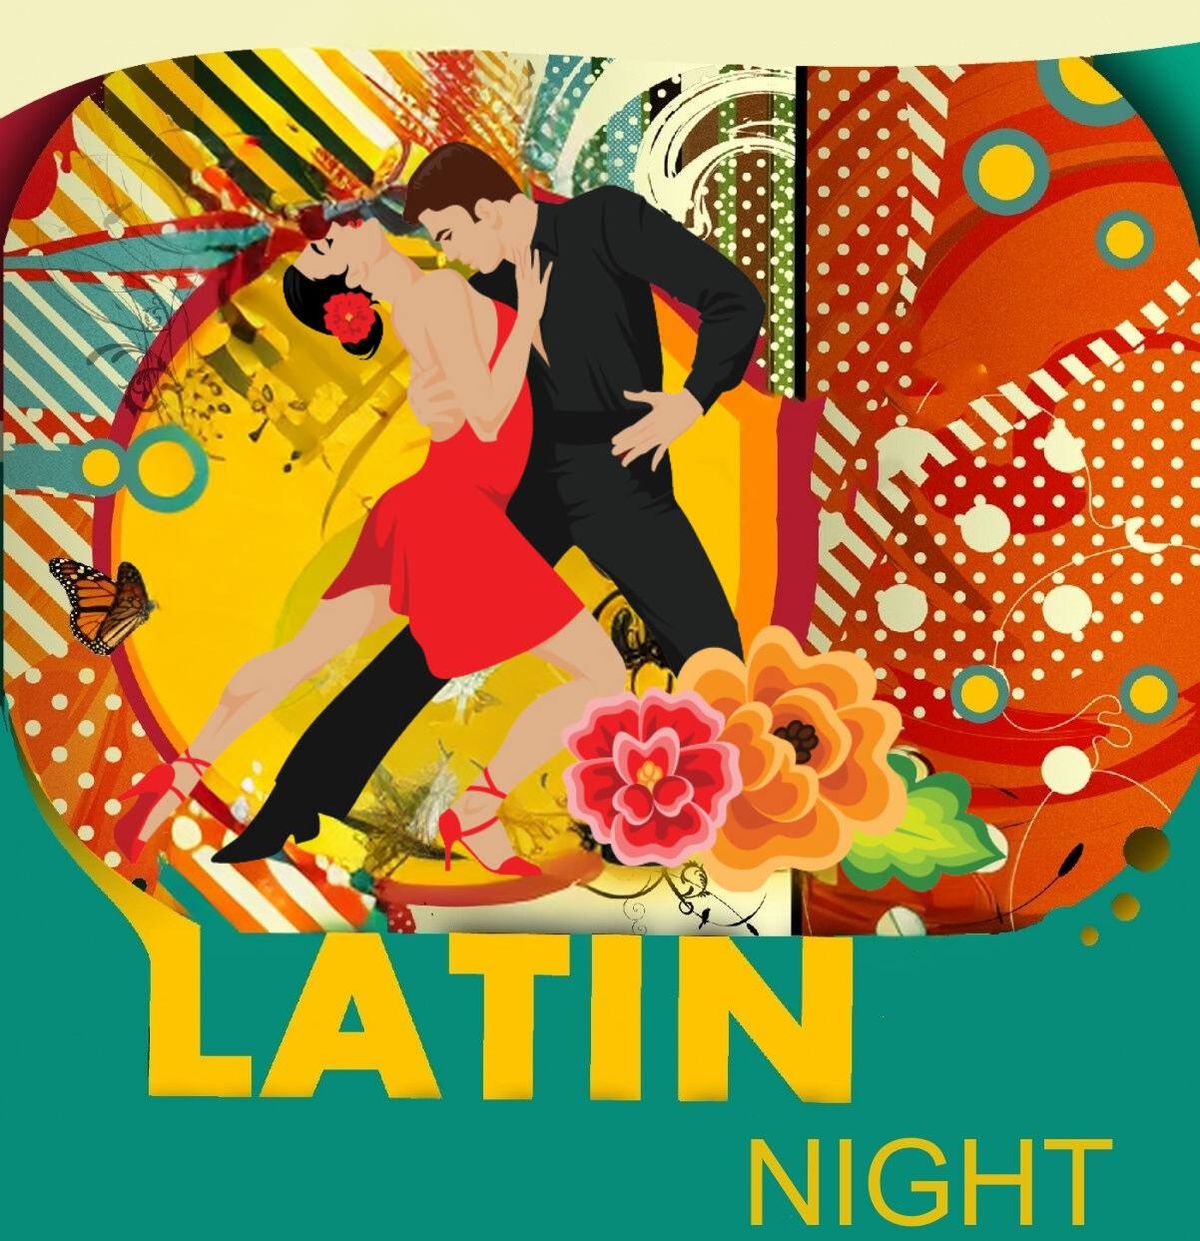 Latin Night with Harby